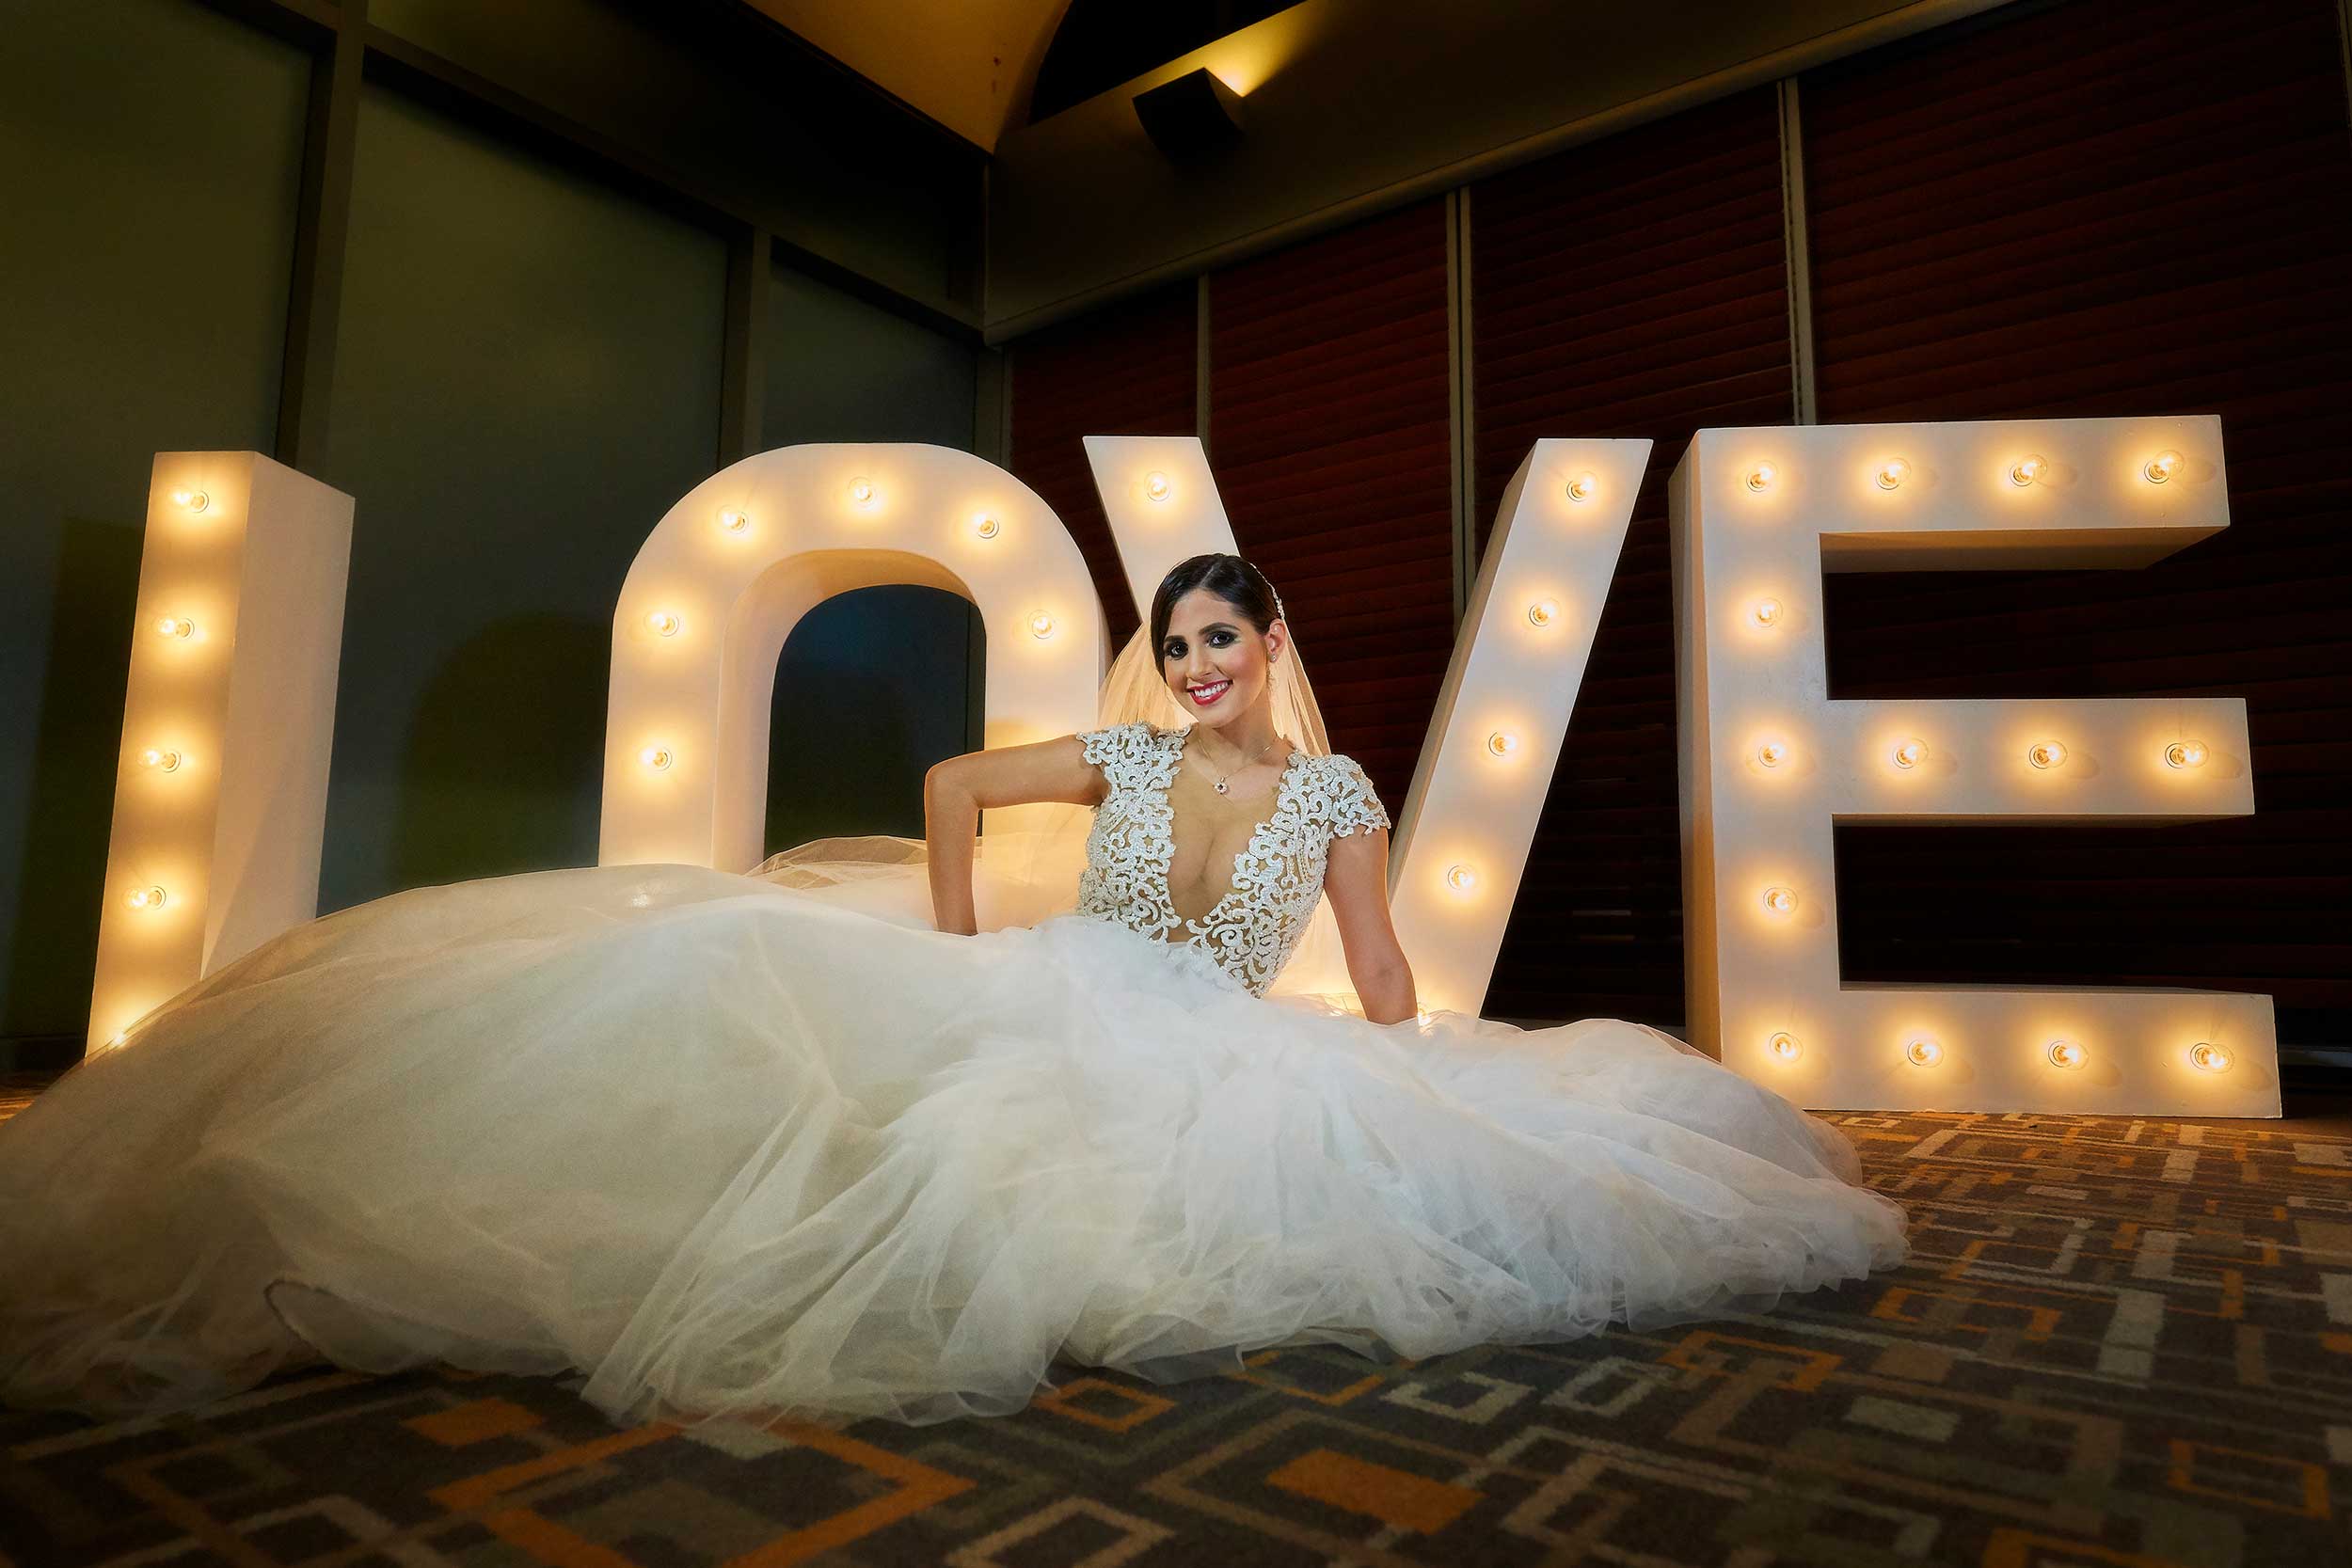 Bride posing with love sign